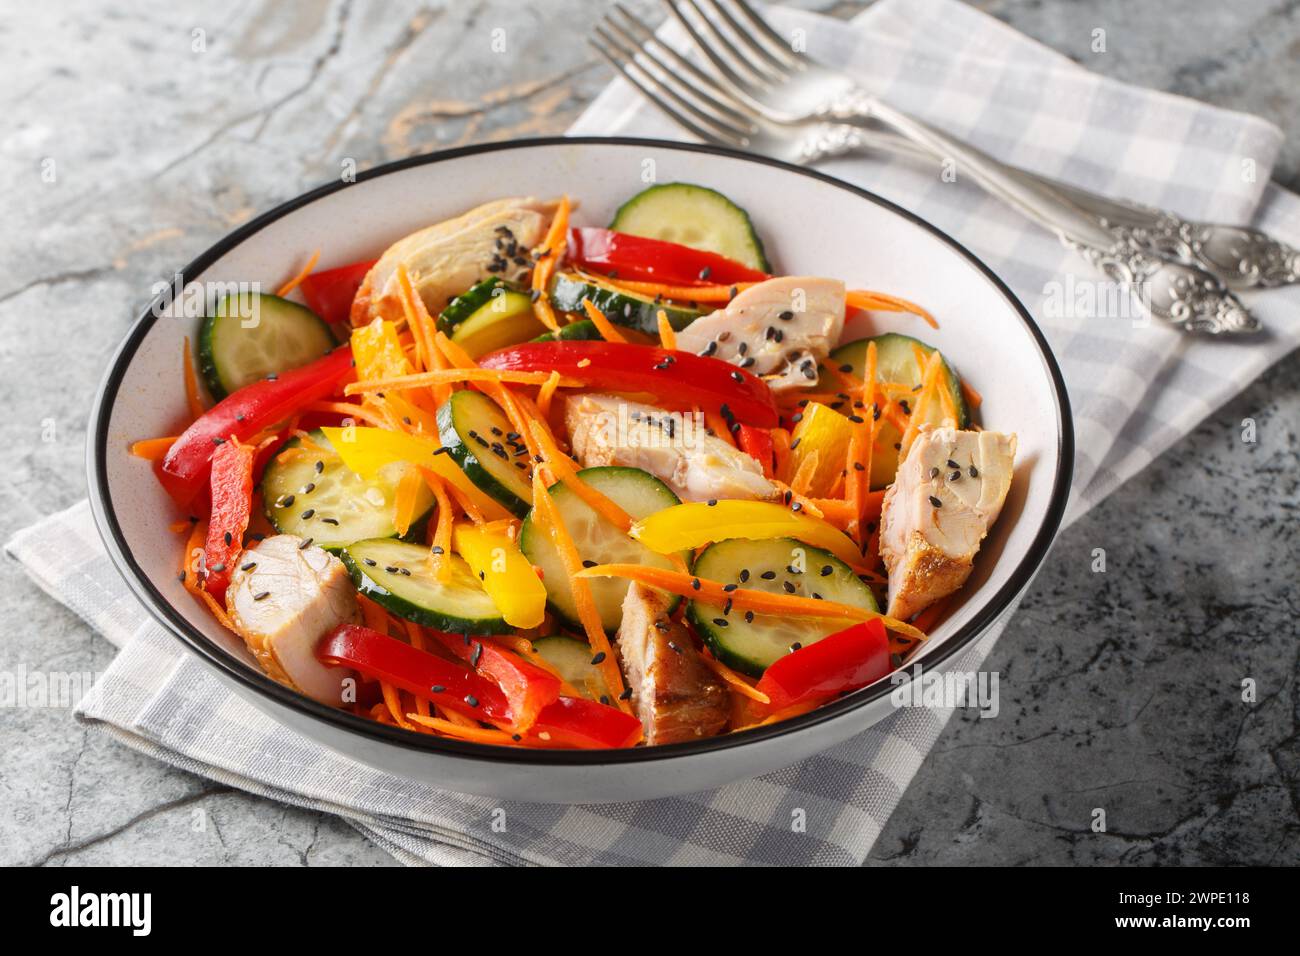 Healthy food Chicken salad with fresh cucumbers, bell peppers, carrots and sesame seeds close-up in a bowl on the table. Horizontal Stock Photo